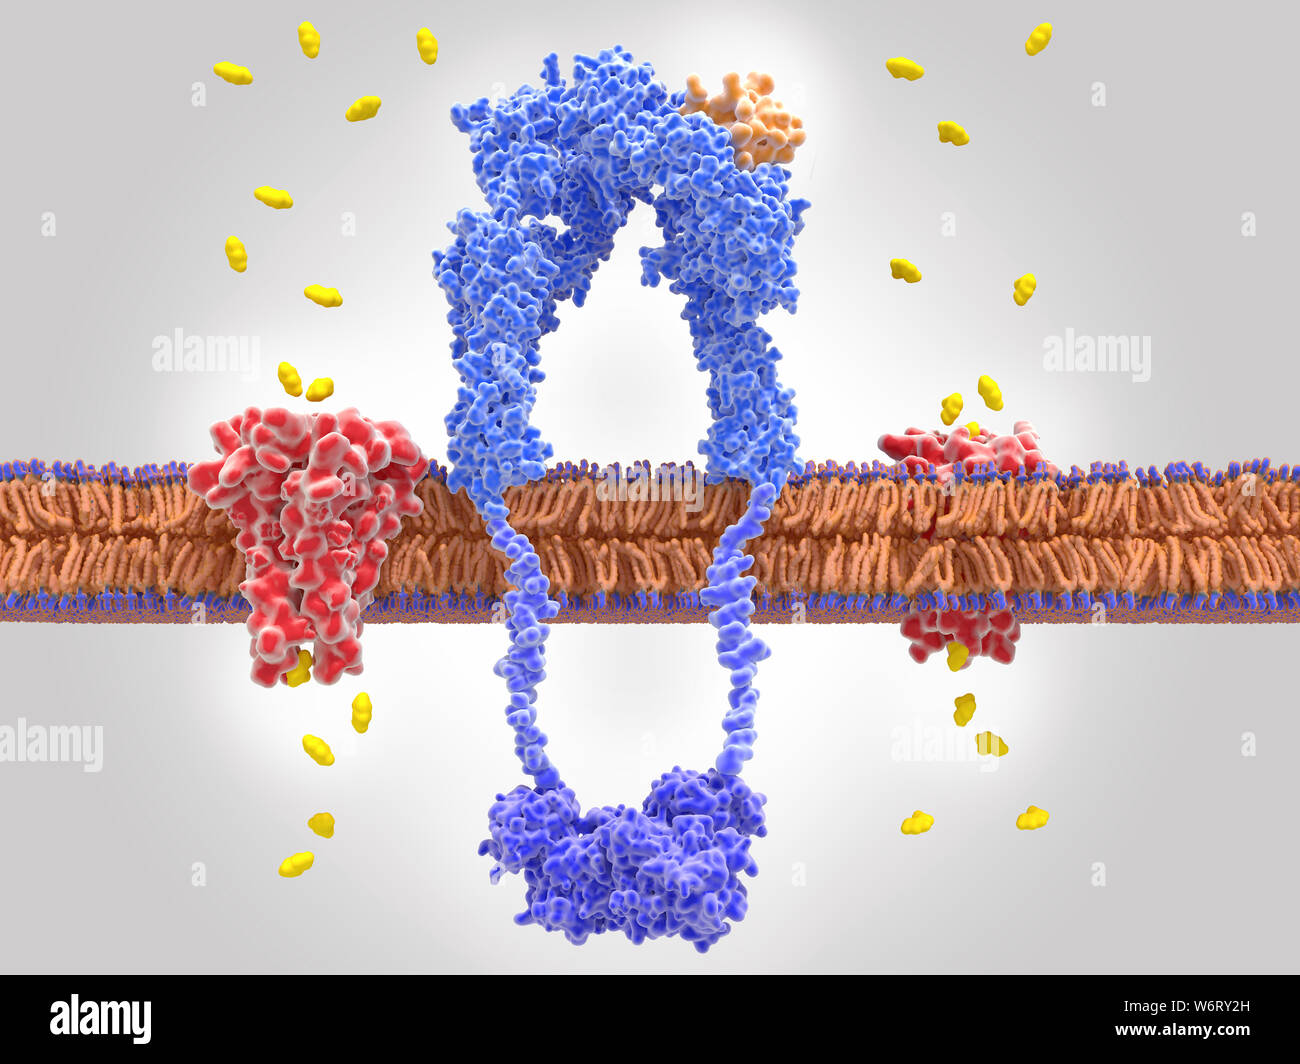 Insulin bound to insulin receptor and glucose transport, illustration. The insulin receptor (blue) is a transmembrane protein, that has become activated through the binding of insulin (orange). Insulin binding induces structural changes within the receptor. These changes trigger a biochemical chain of events inside the cell (signal transduction), that finally leads to the activation of glucose transporter proteins (red). These activated channel proteins allow for the transport of glucose (yellow) into the cell, which is then converted into energy through cellular respiration. Stock Photo